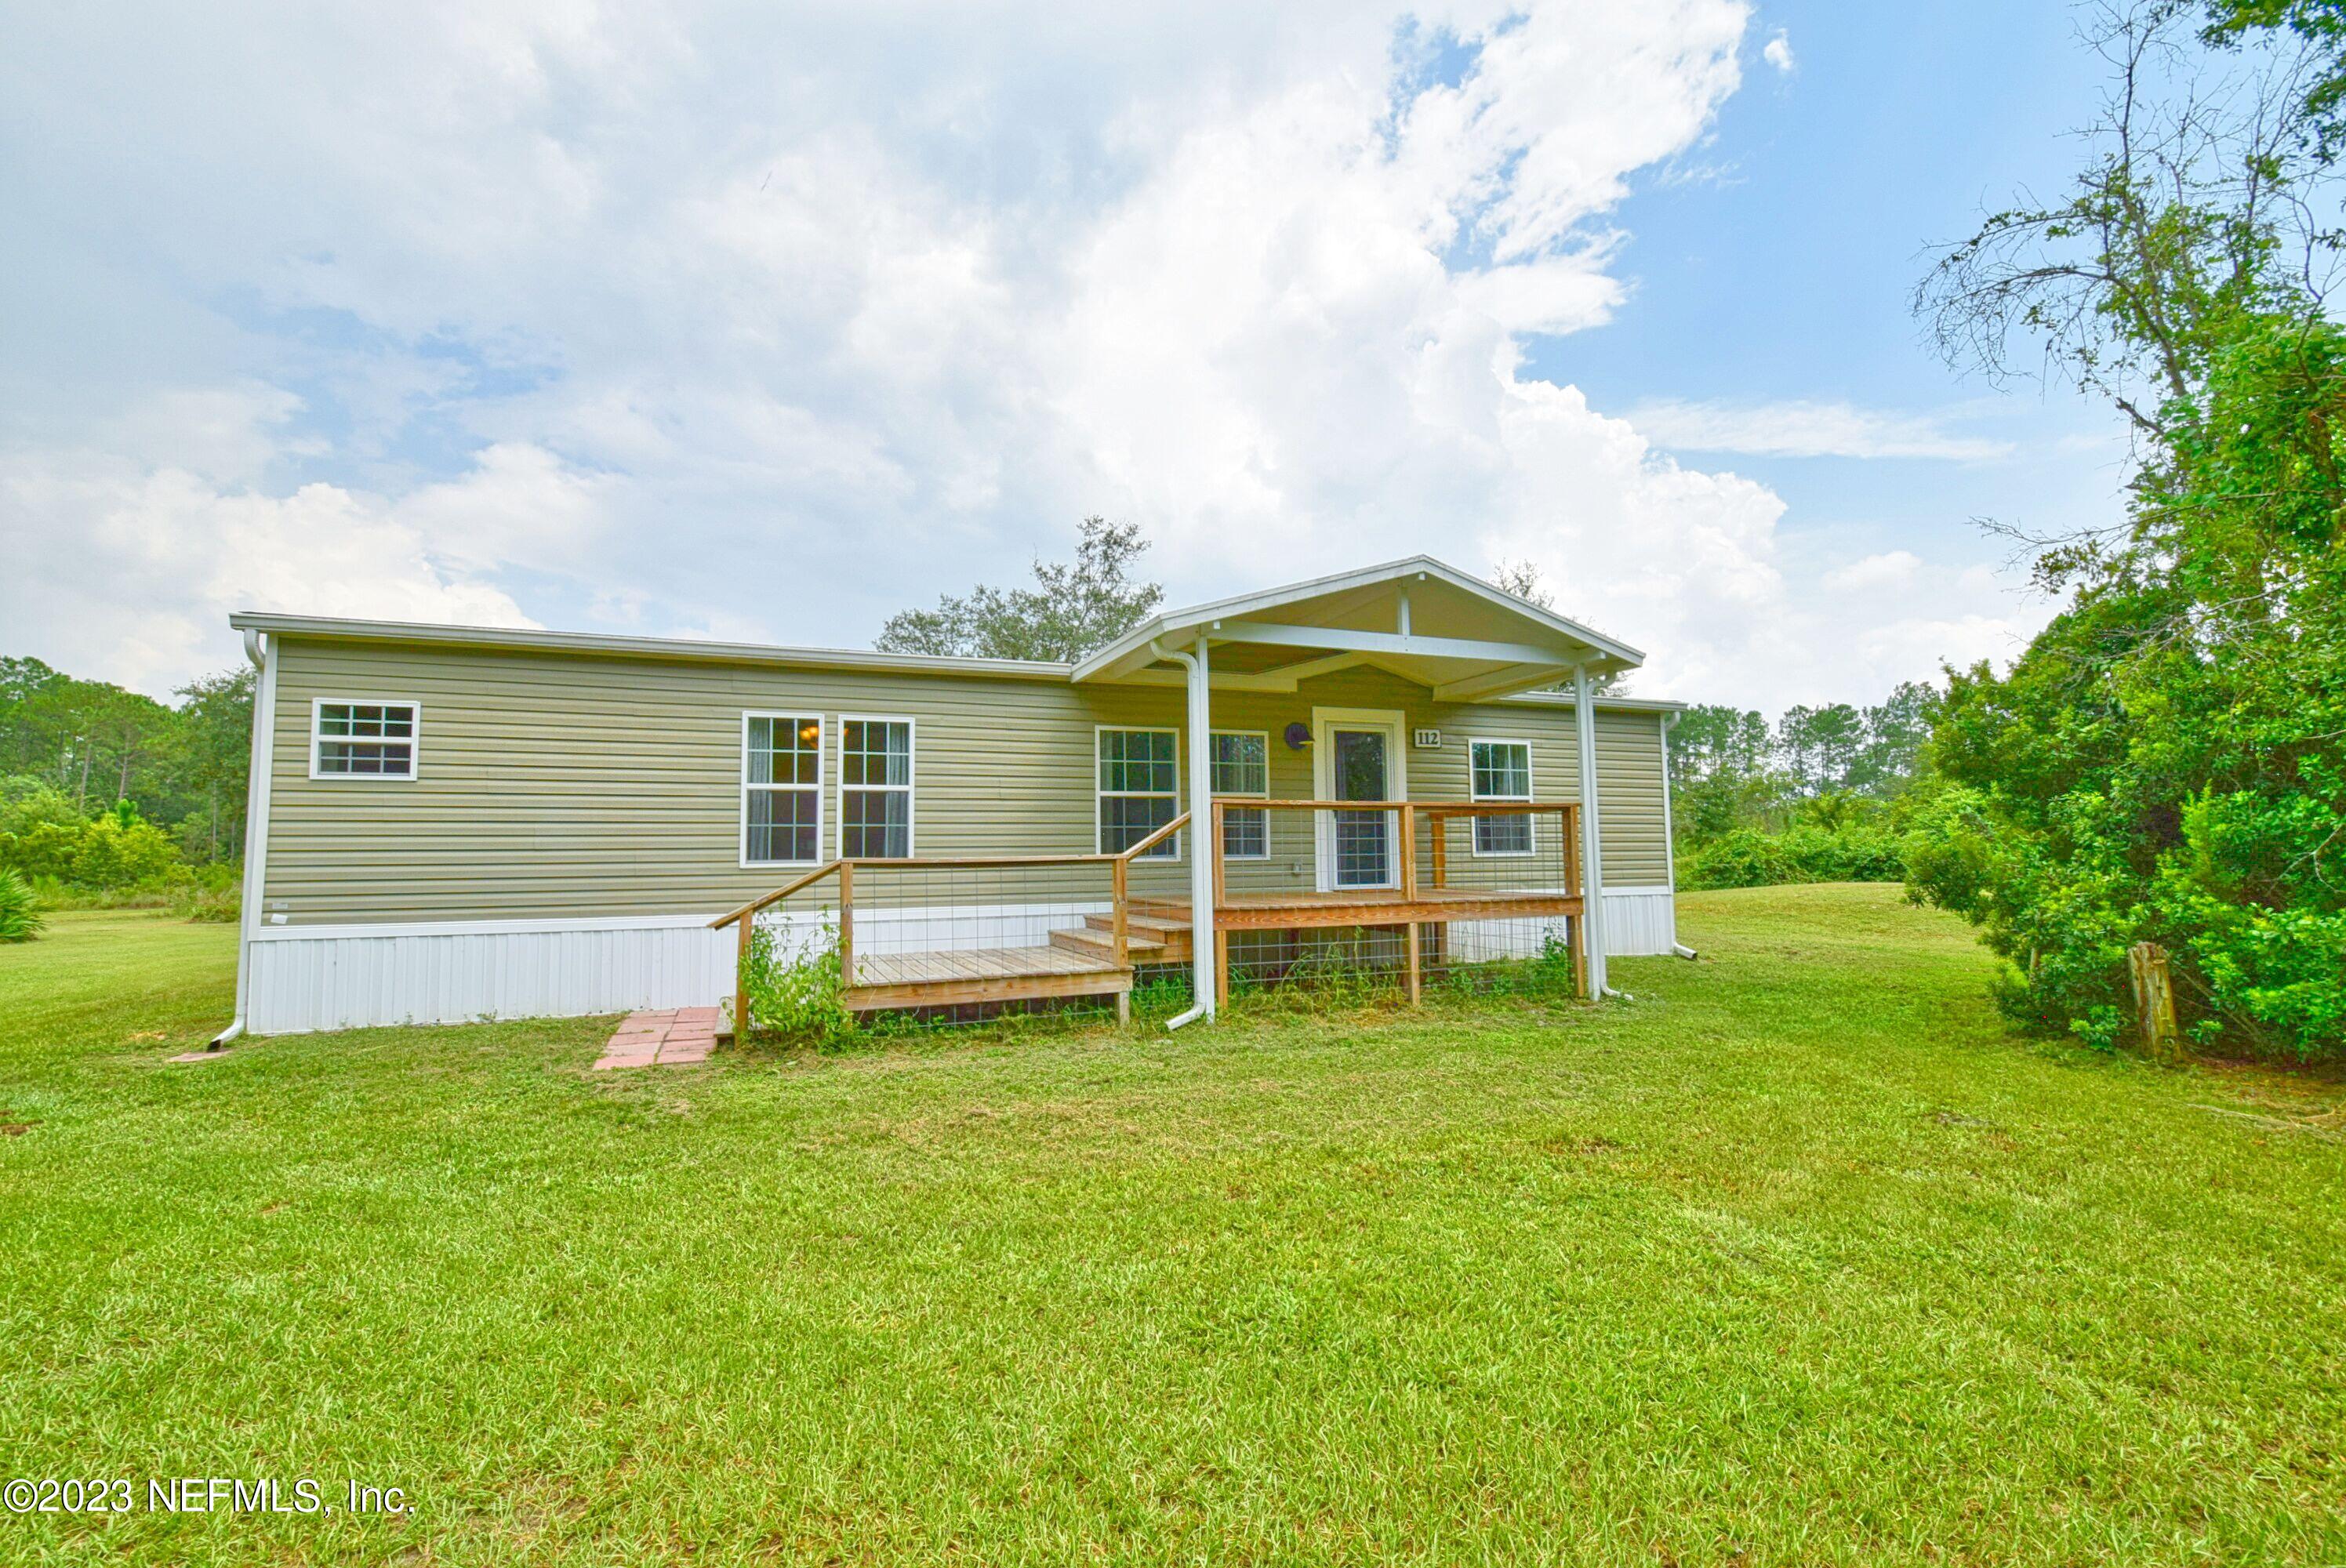 Hollister, FL home for sale located at 112 LITTLE PERRY Lane, Hollister, FL 32147